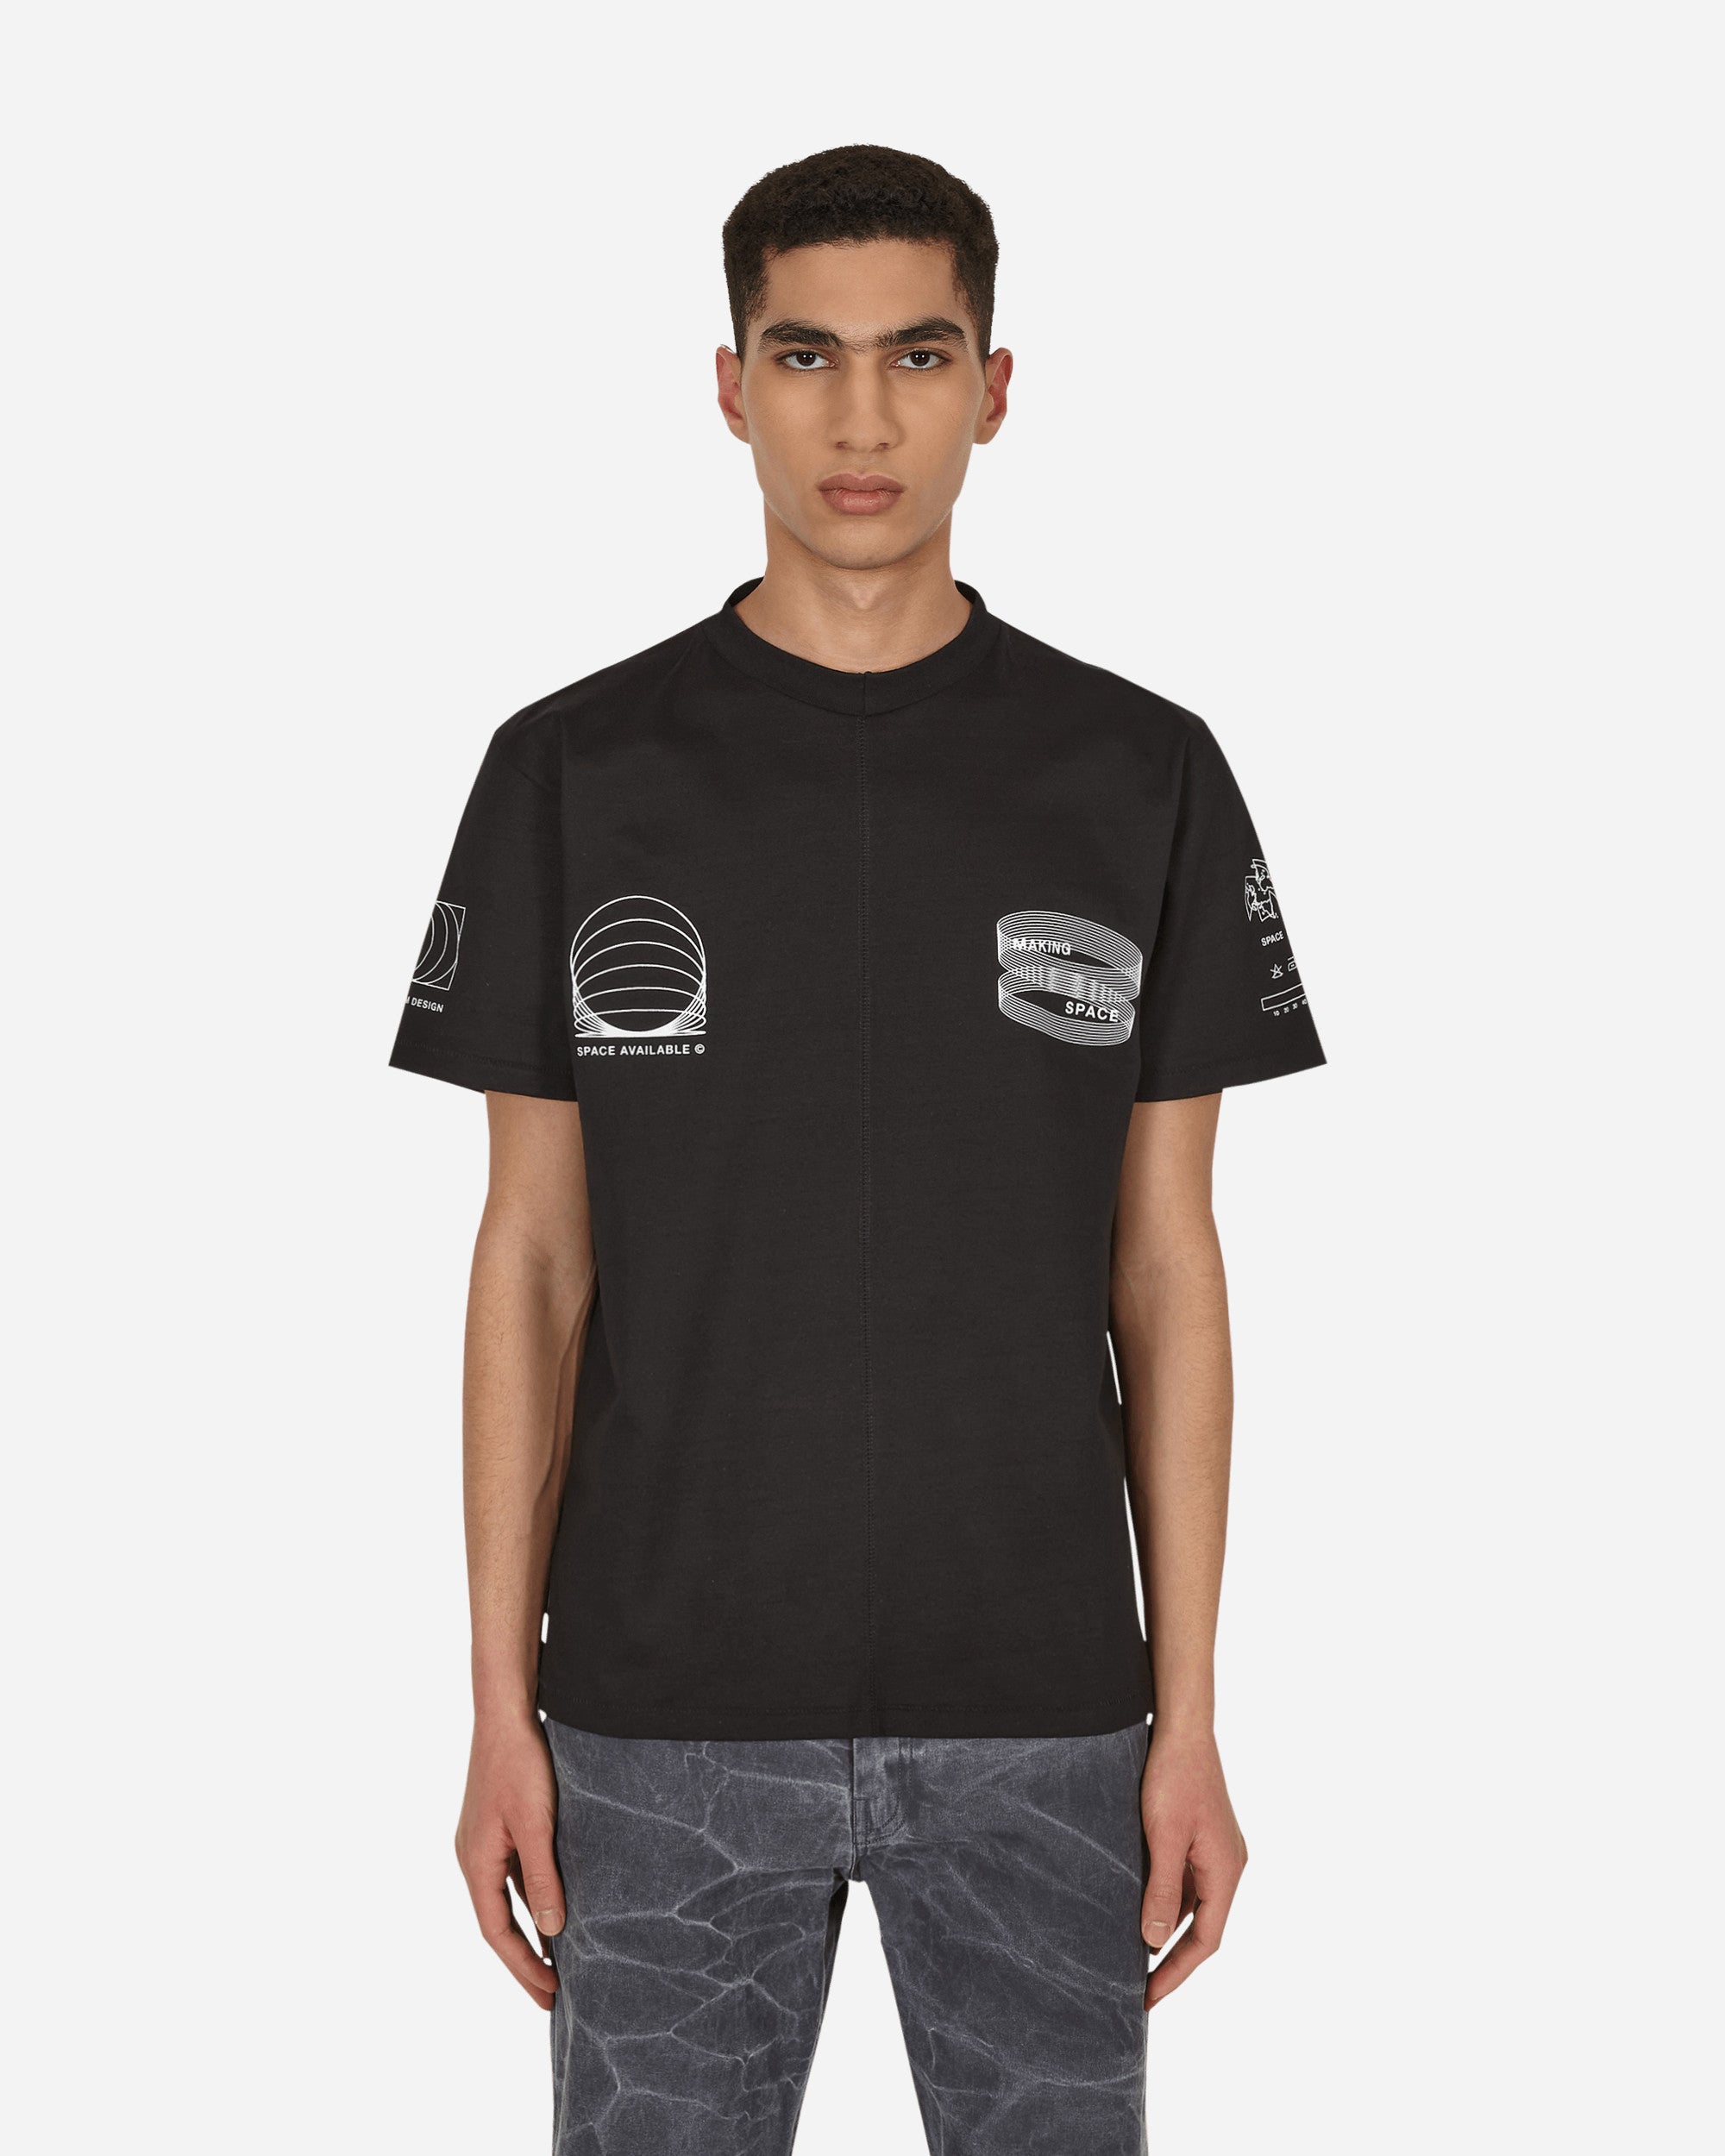 Space Available Connective Link Black T-Shirts Shortsleeve SA-CLT001-BLK BLACK